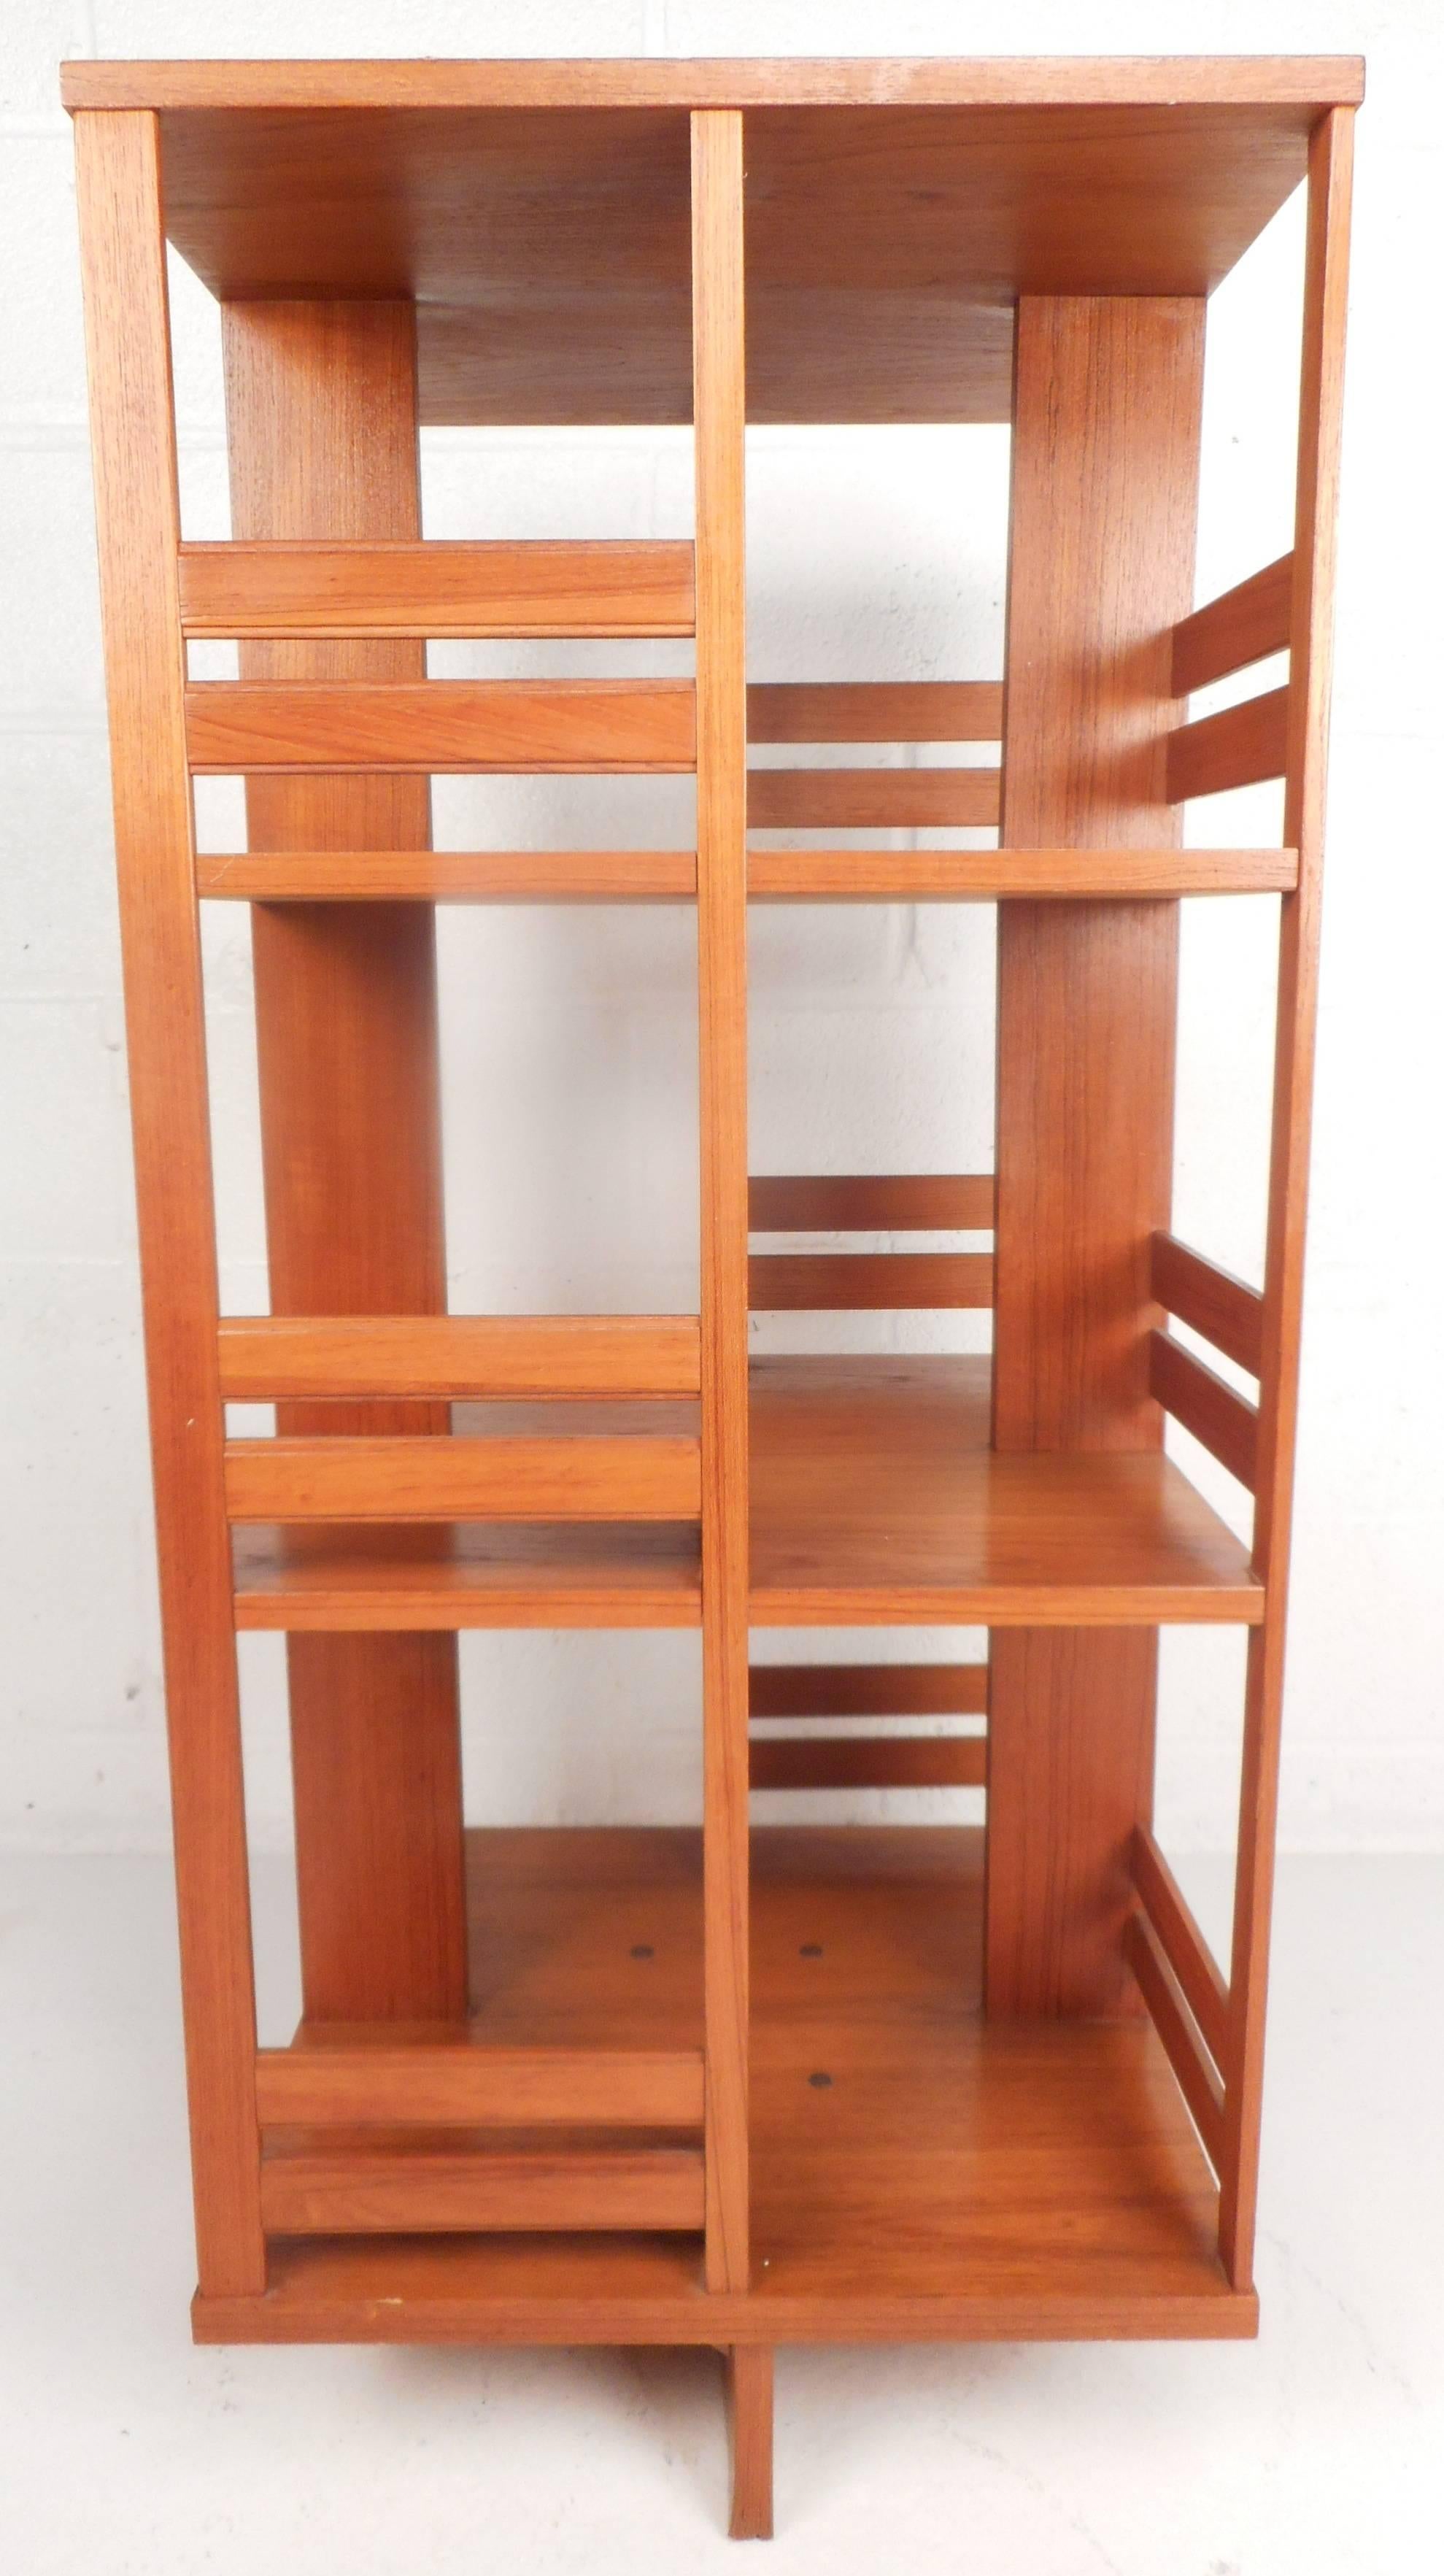 This stunning vintage modern Danish bookcase revolves 360 degrees around ensuring the utmost convenience without sacrificing style. The sleek design has three shelves offering plenty of storage space. The gorgeous teakwood grain is sure to